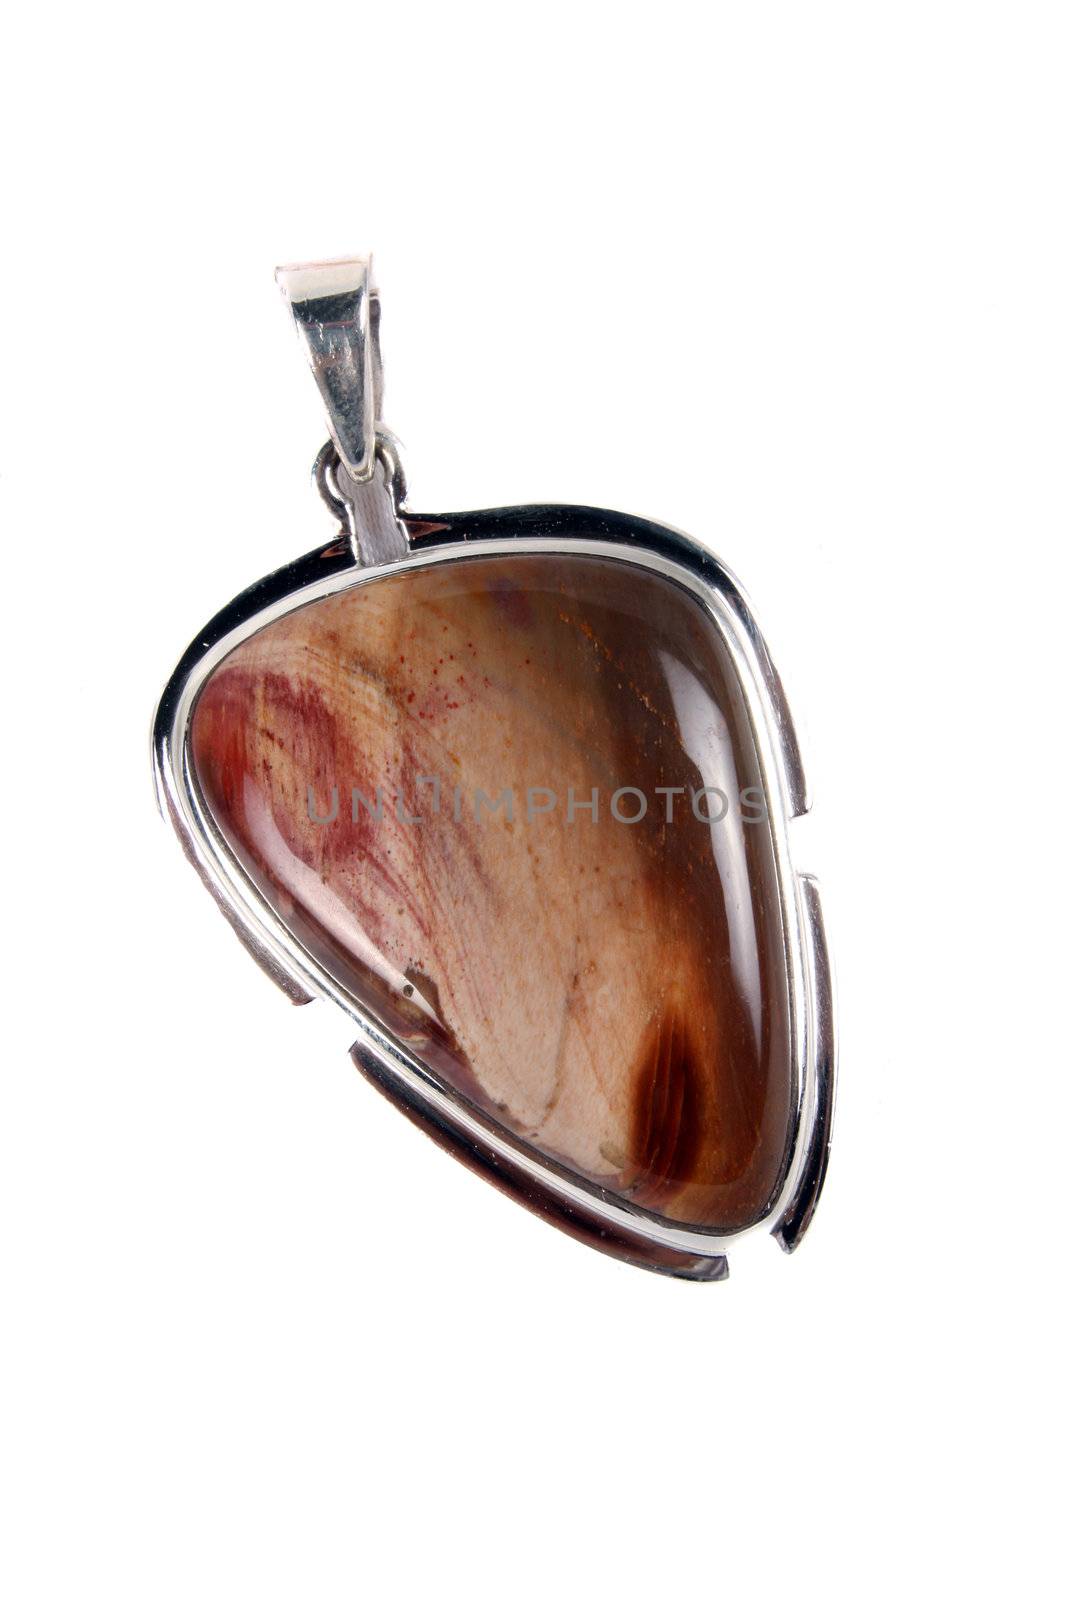 A Petriwood pendant made of silver used in alternative therapies like crystal healing and astrology, isolated on white studio background.